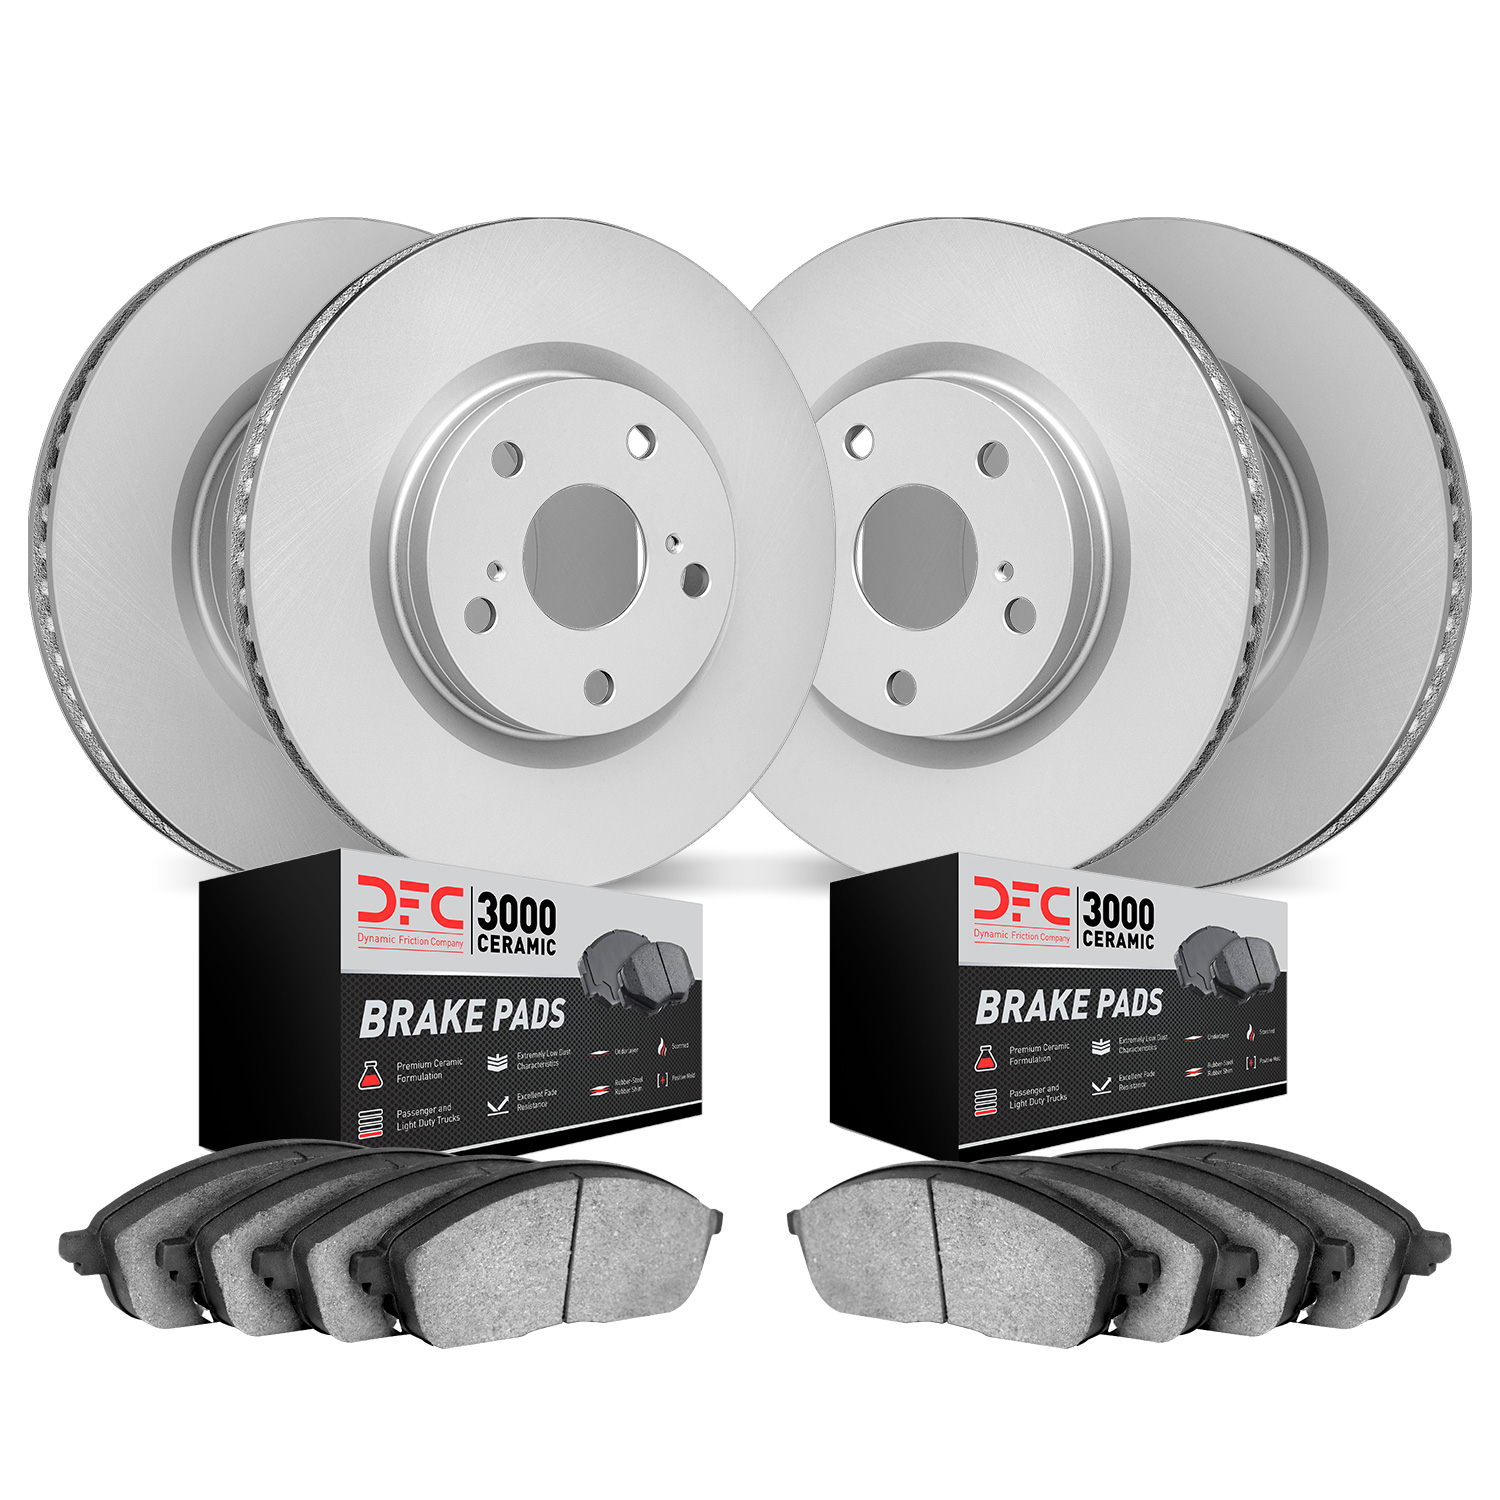 4304-75009 Geospec Brake Rotors with 3000-Series Ceramic Brake Pads Kit, 2014-2015 Lexus/Toyota/Scion, Position: Front and Rear